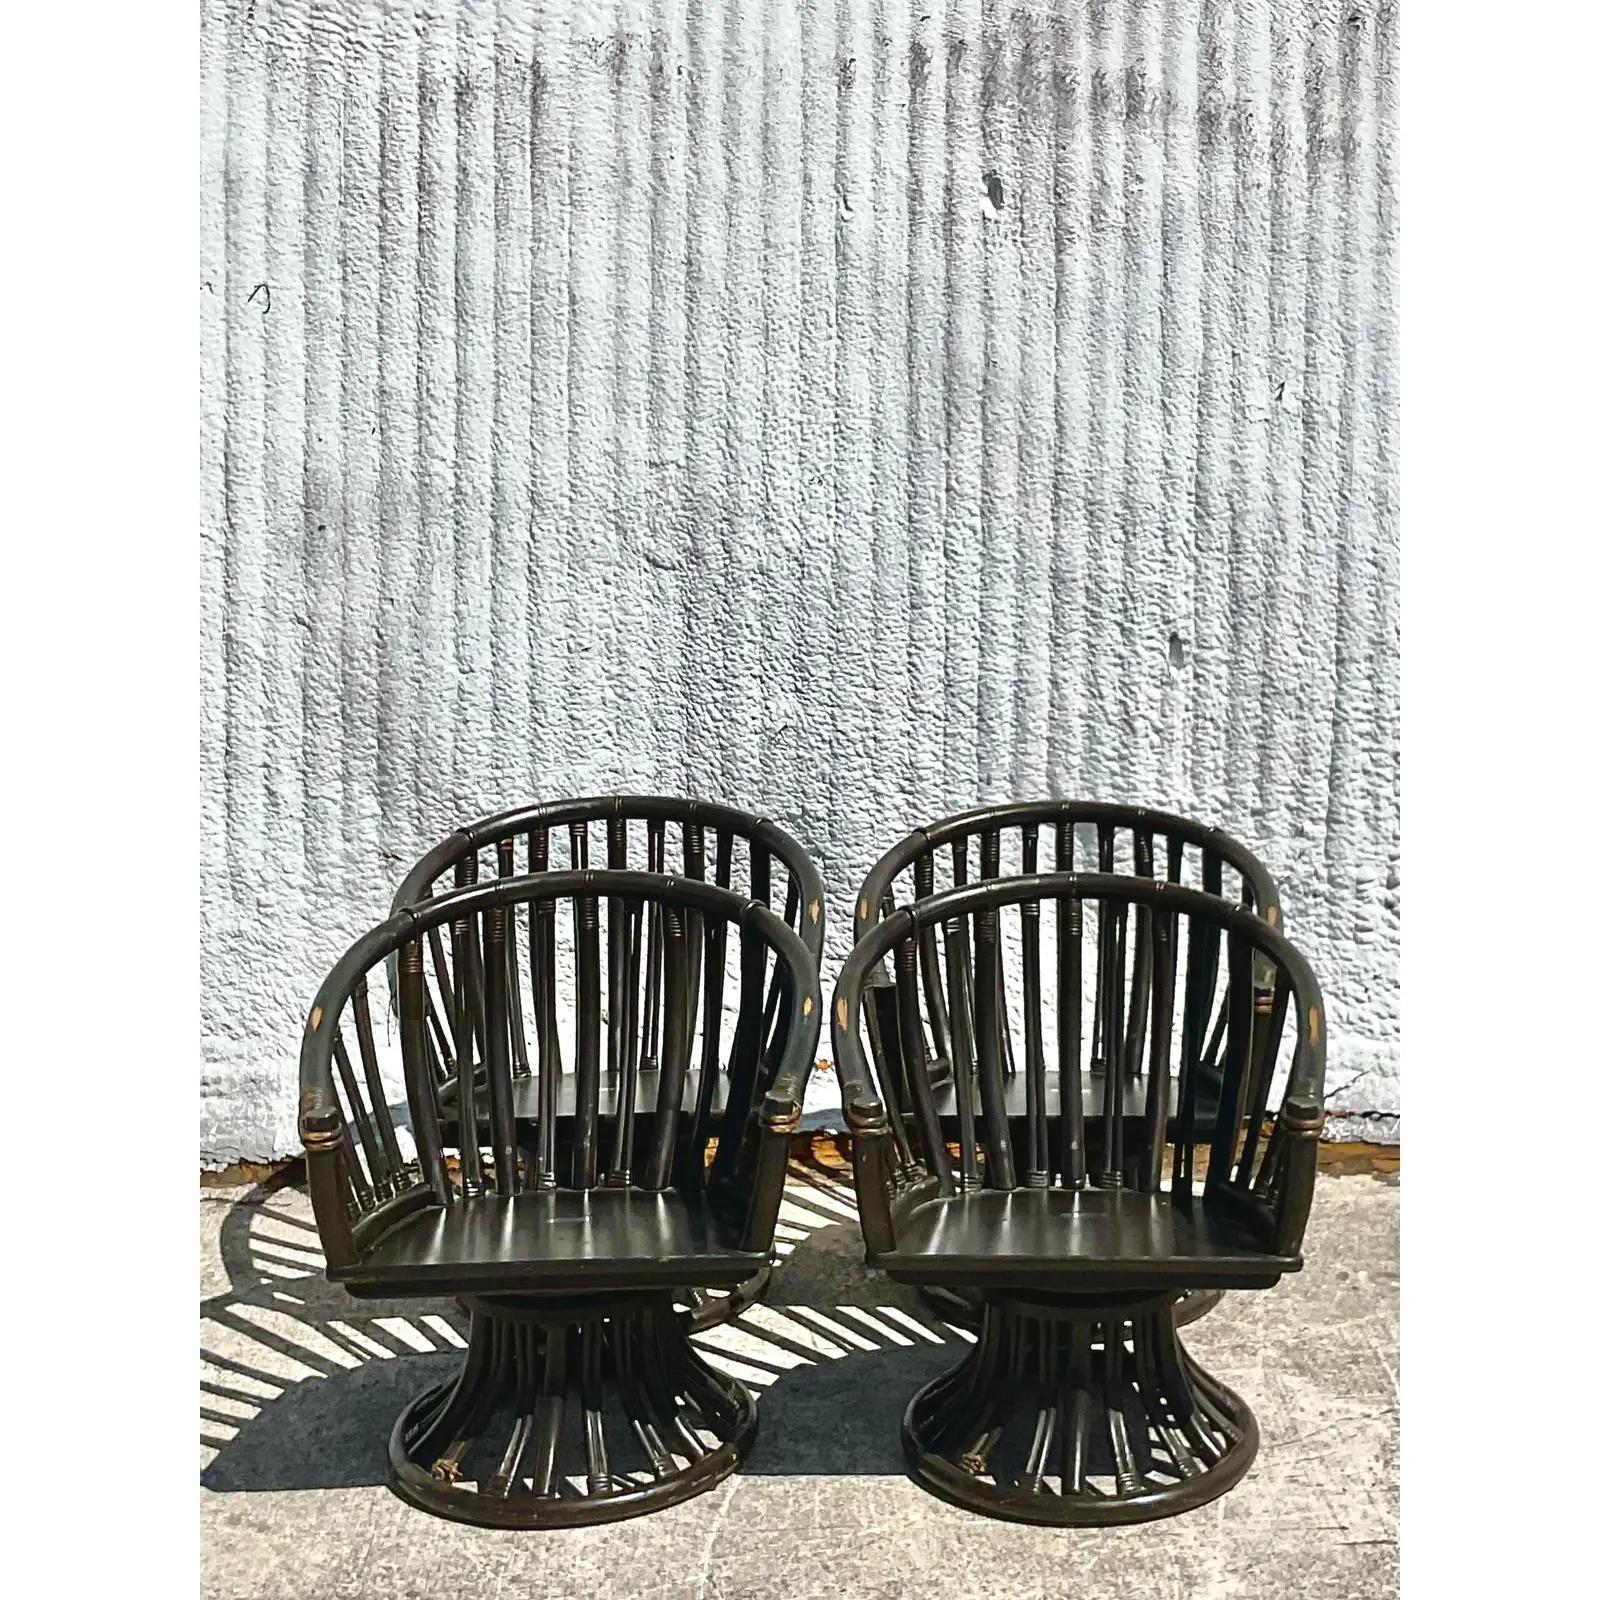 Fantastic set of four vintage Coastal swivel chairs. Made by the iconic Ficks Reed group. Heavy rattan in a deep ebony brown. Chic vintage design with a super chic look. Acquired from a Palm Beach estate.